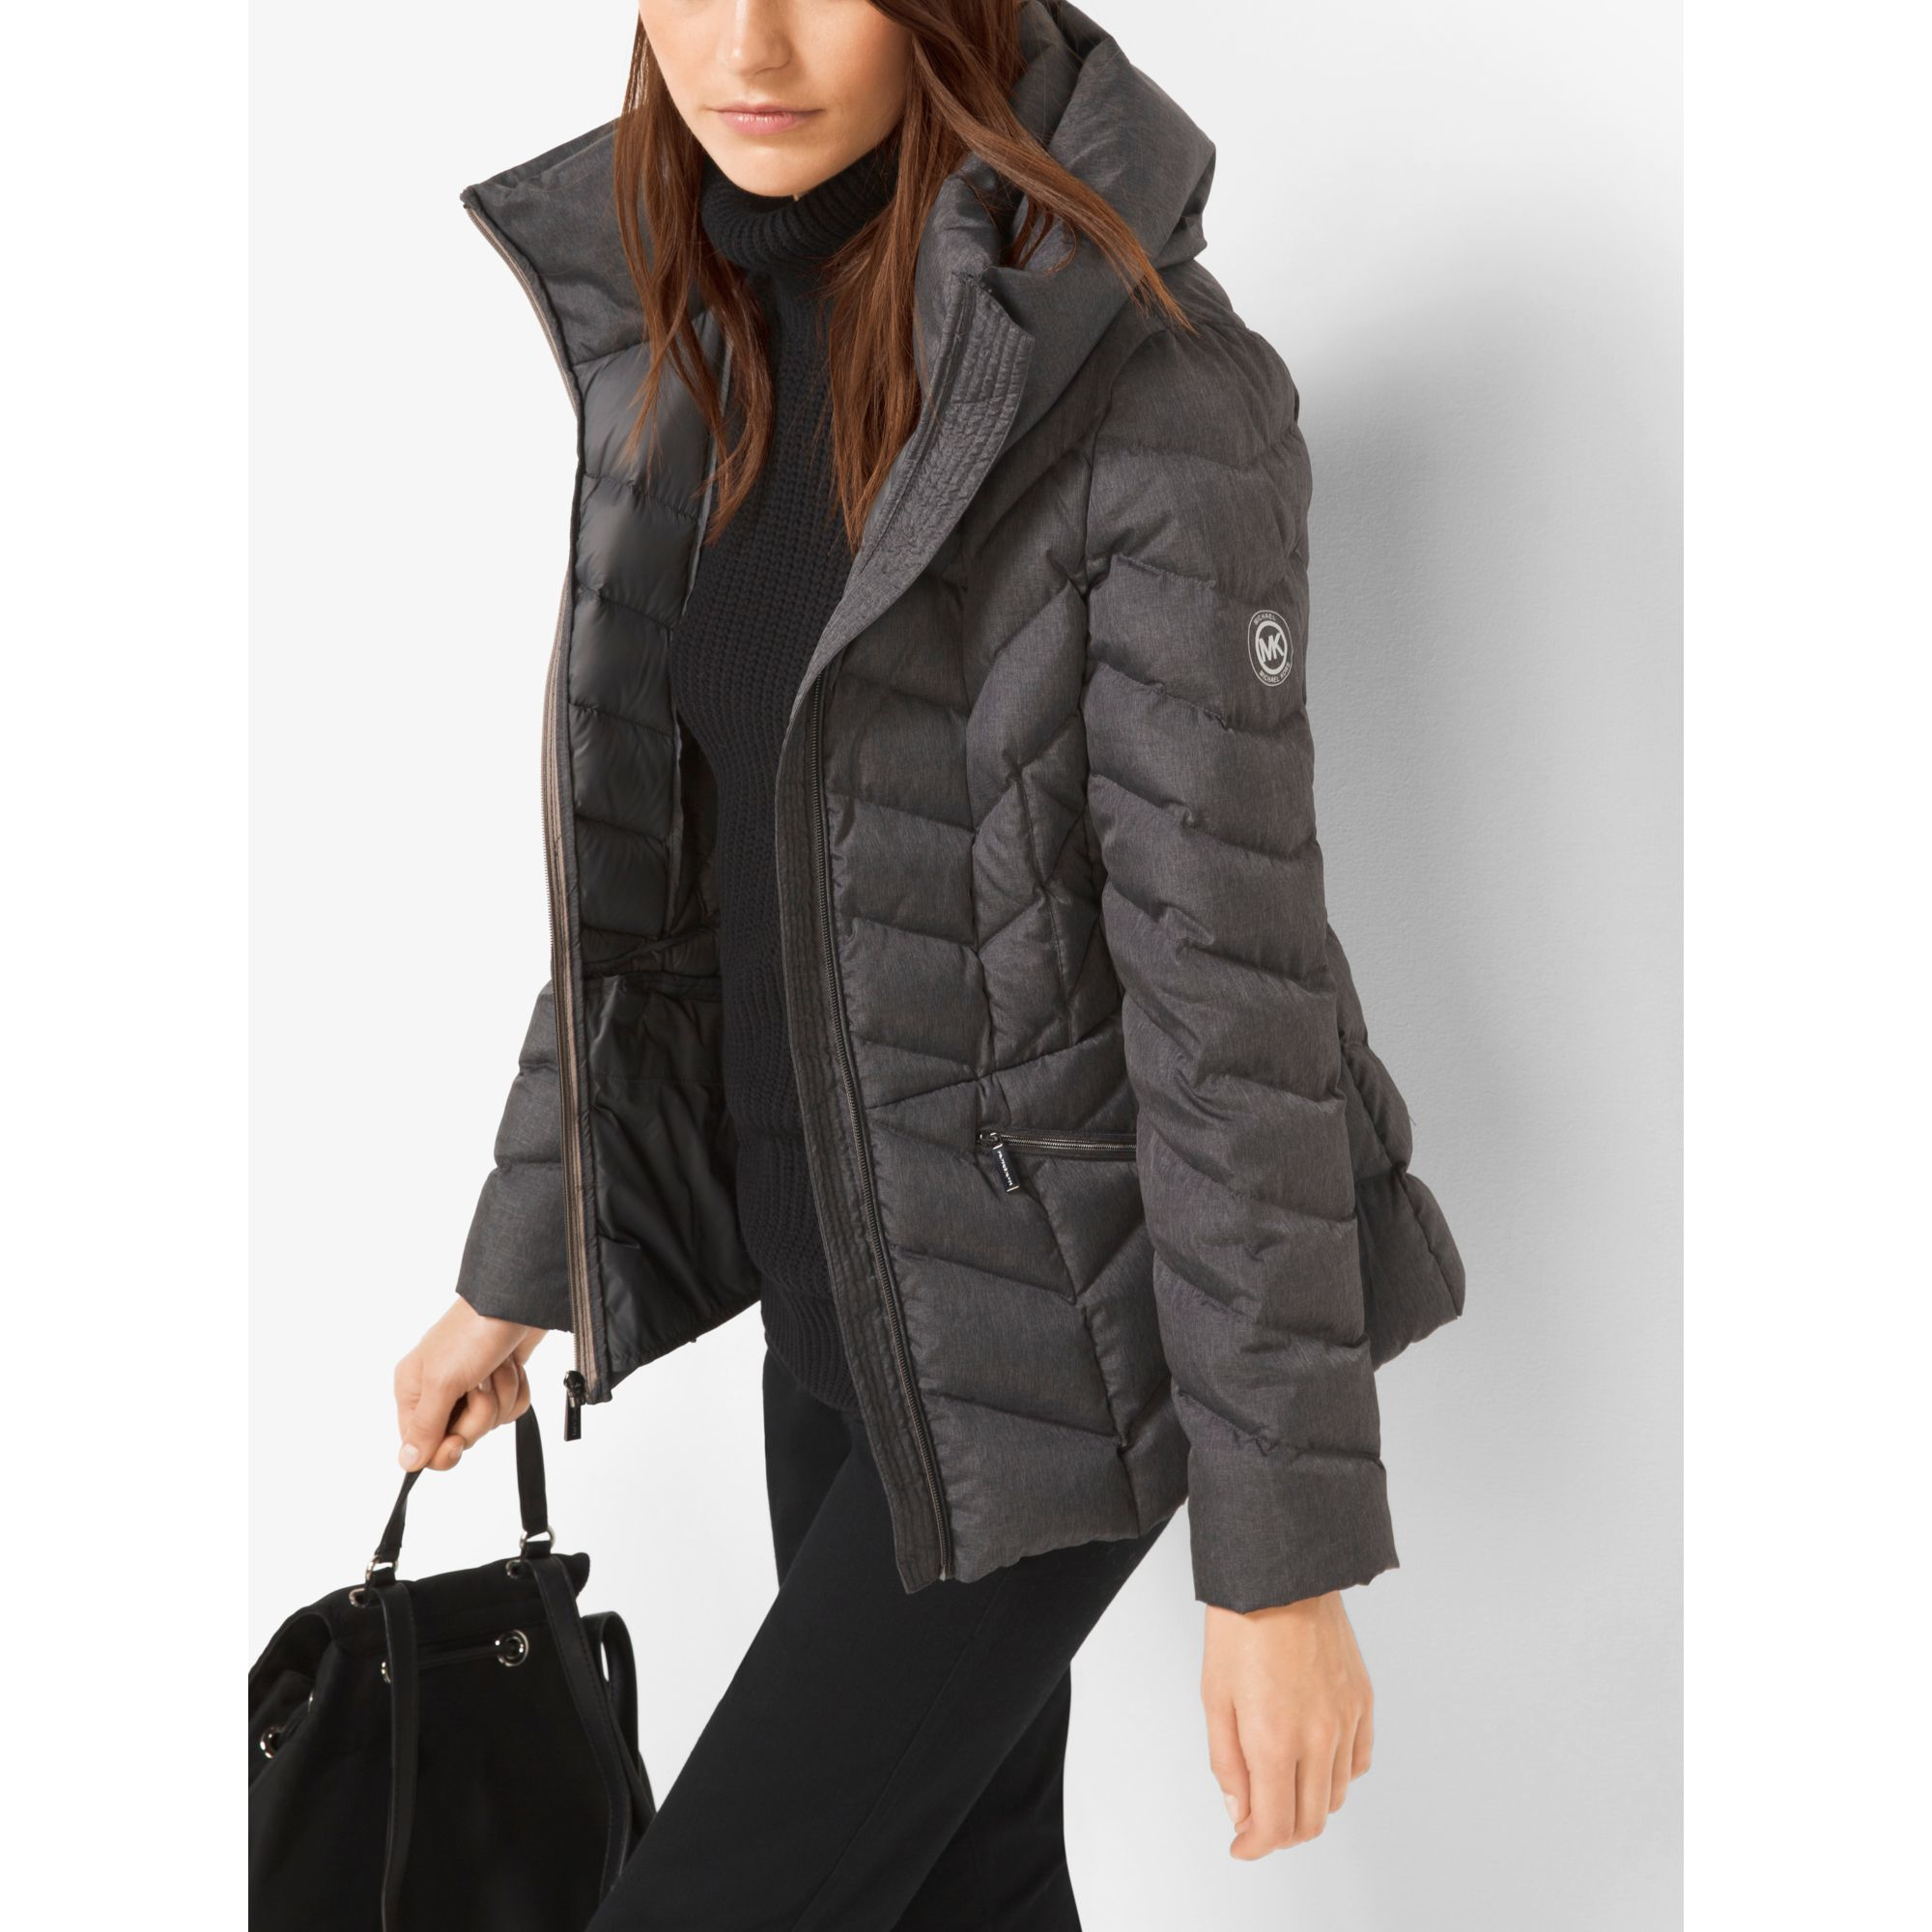 michael kors quilted jacket womens